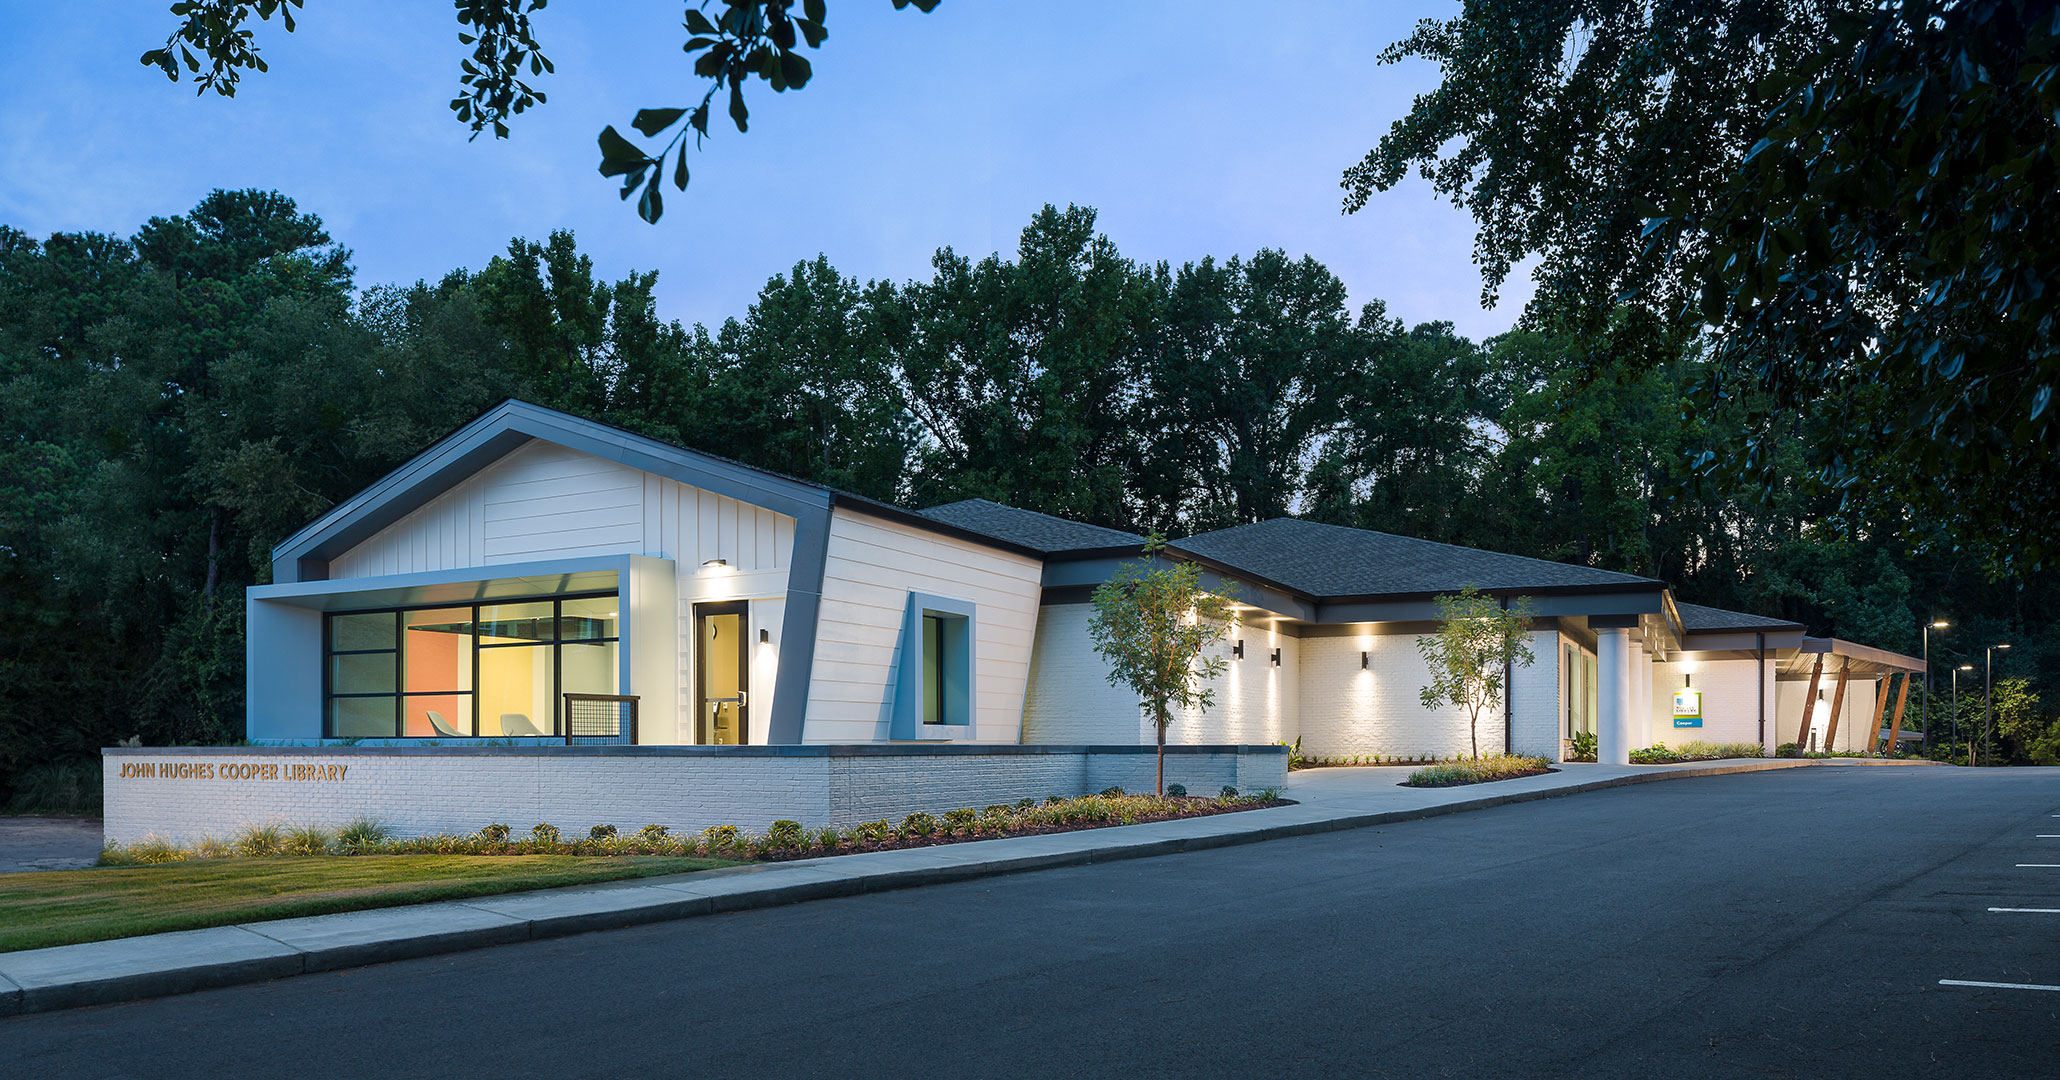 Richland County Library worked with Boudreaux to design modern exterior elements for Richland Cooper Library.